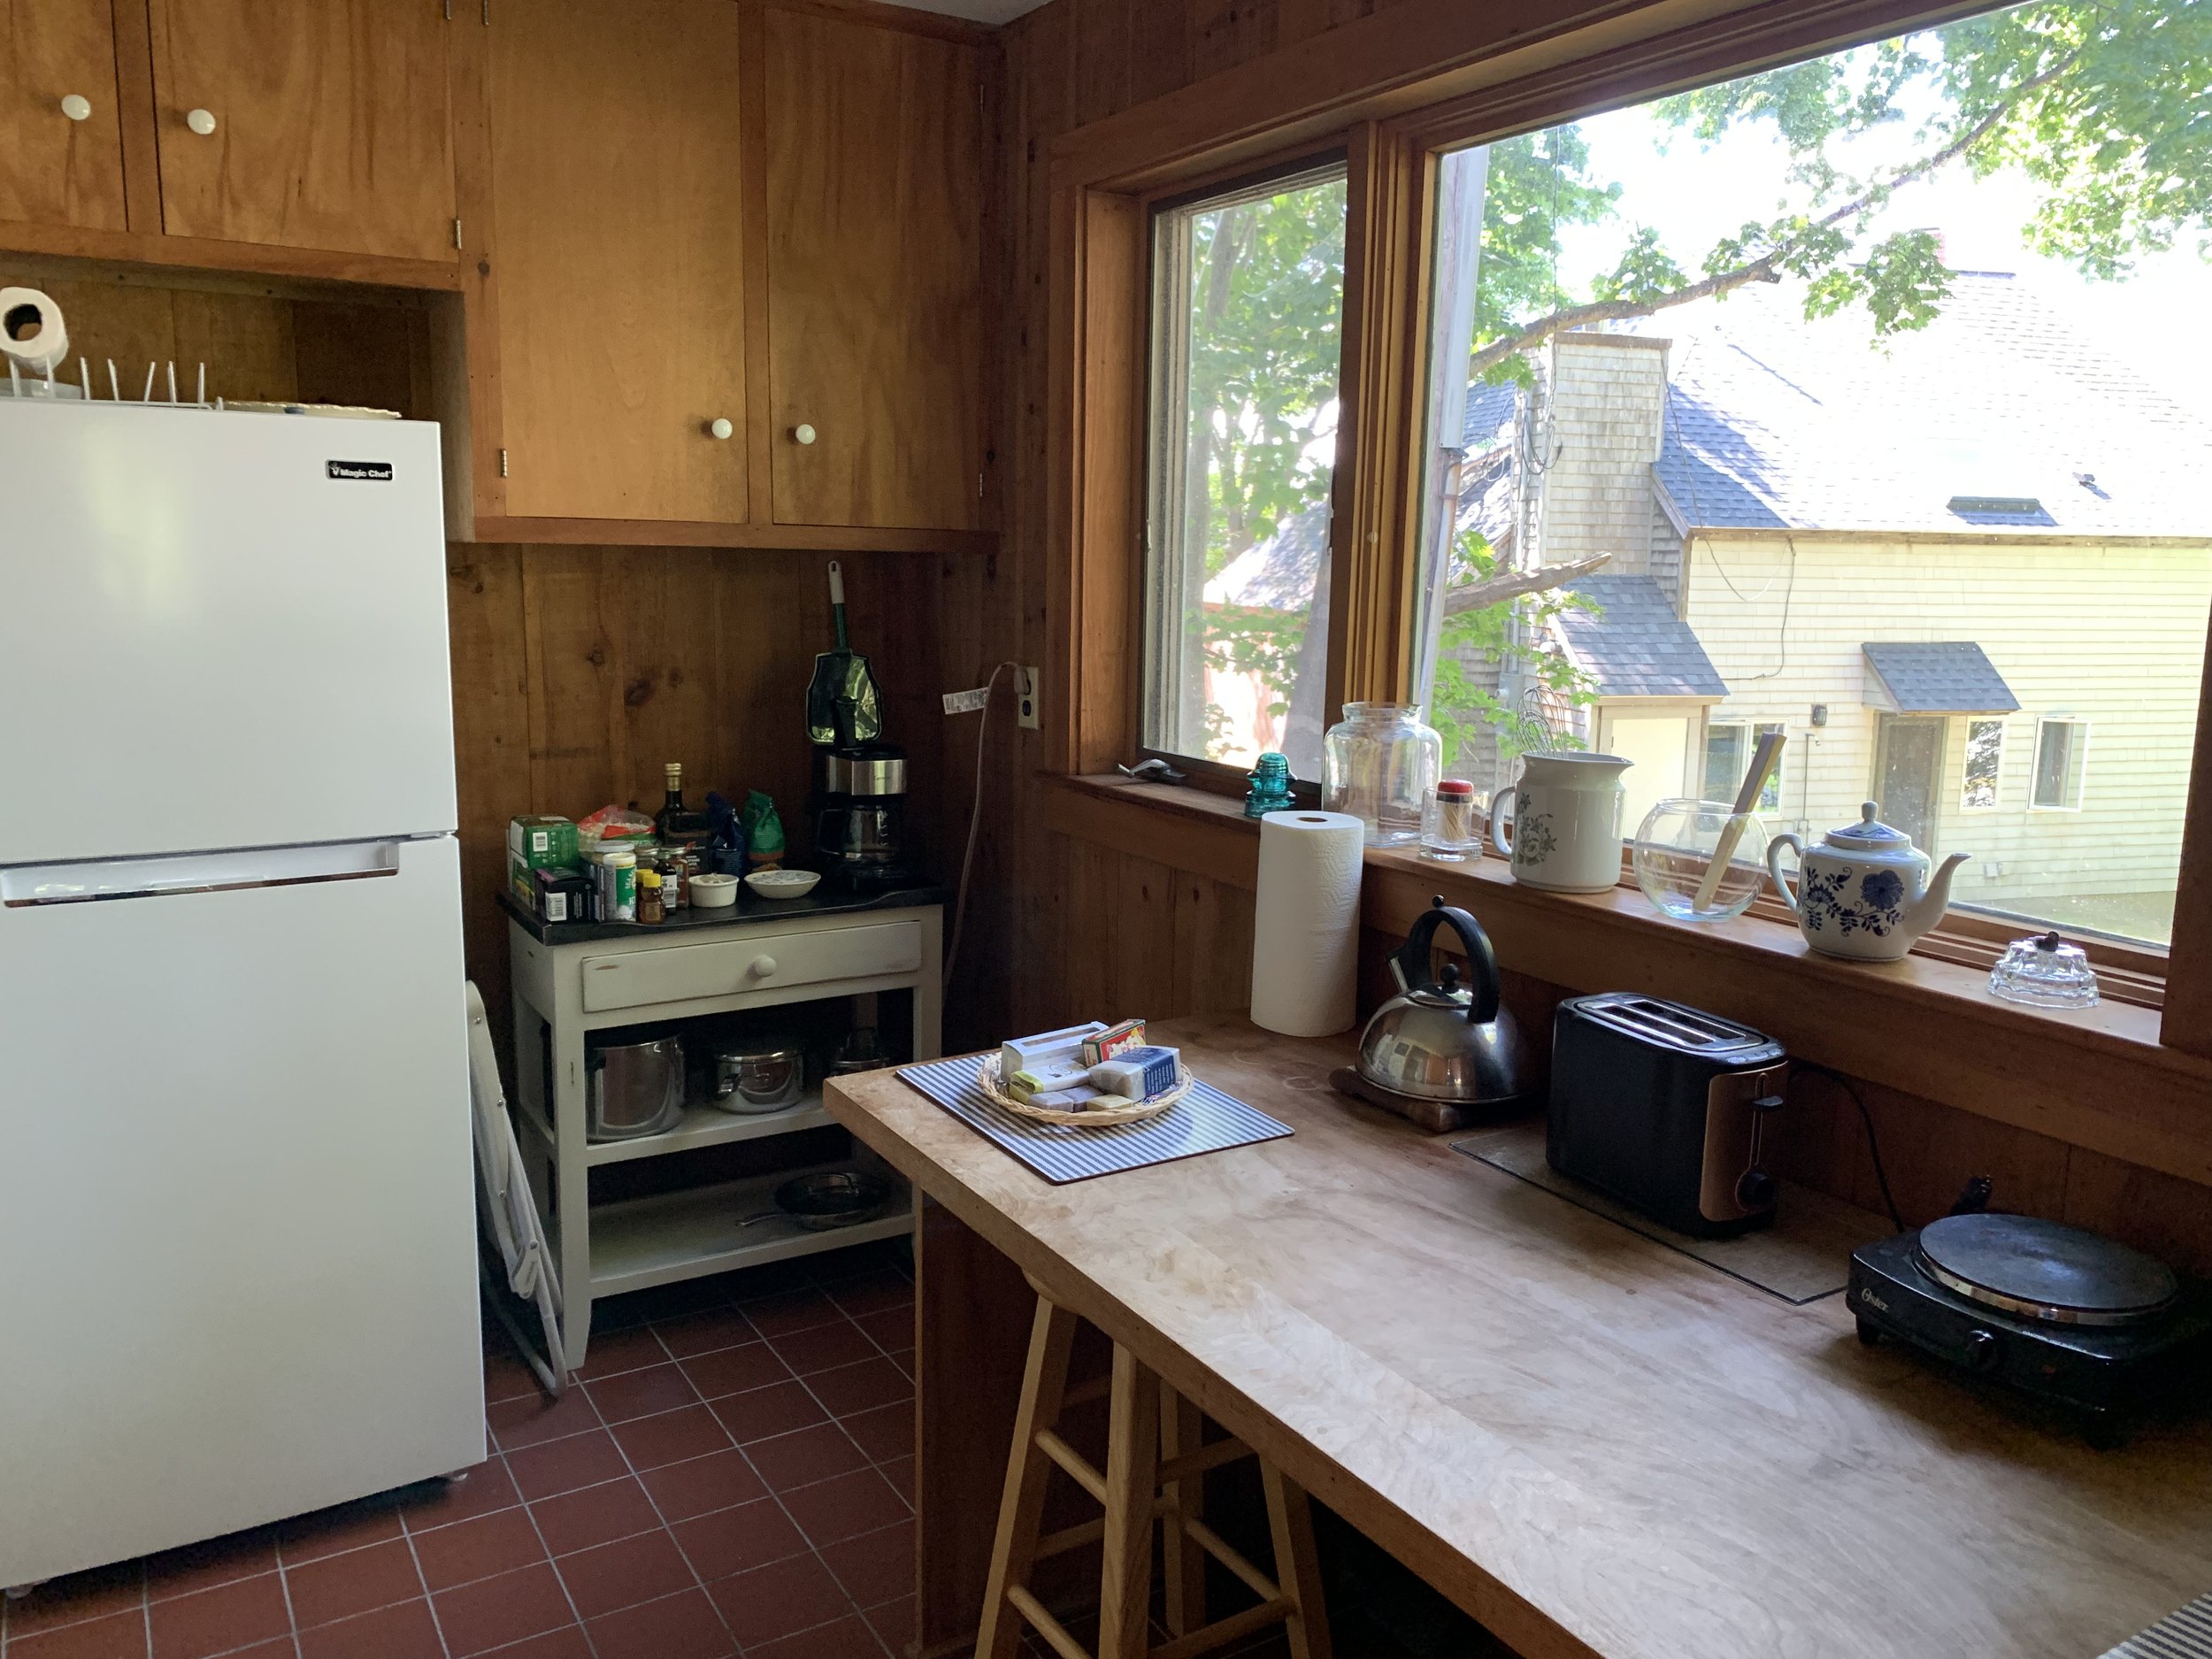  Small kitchen includes two hot plates, coffee maker, and toaster oven (out of frame here at right) 